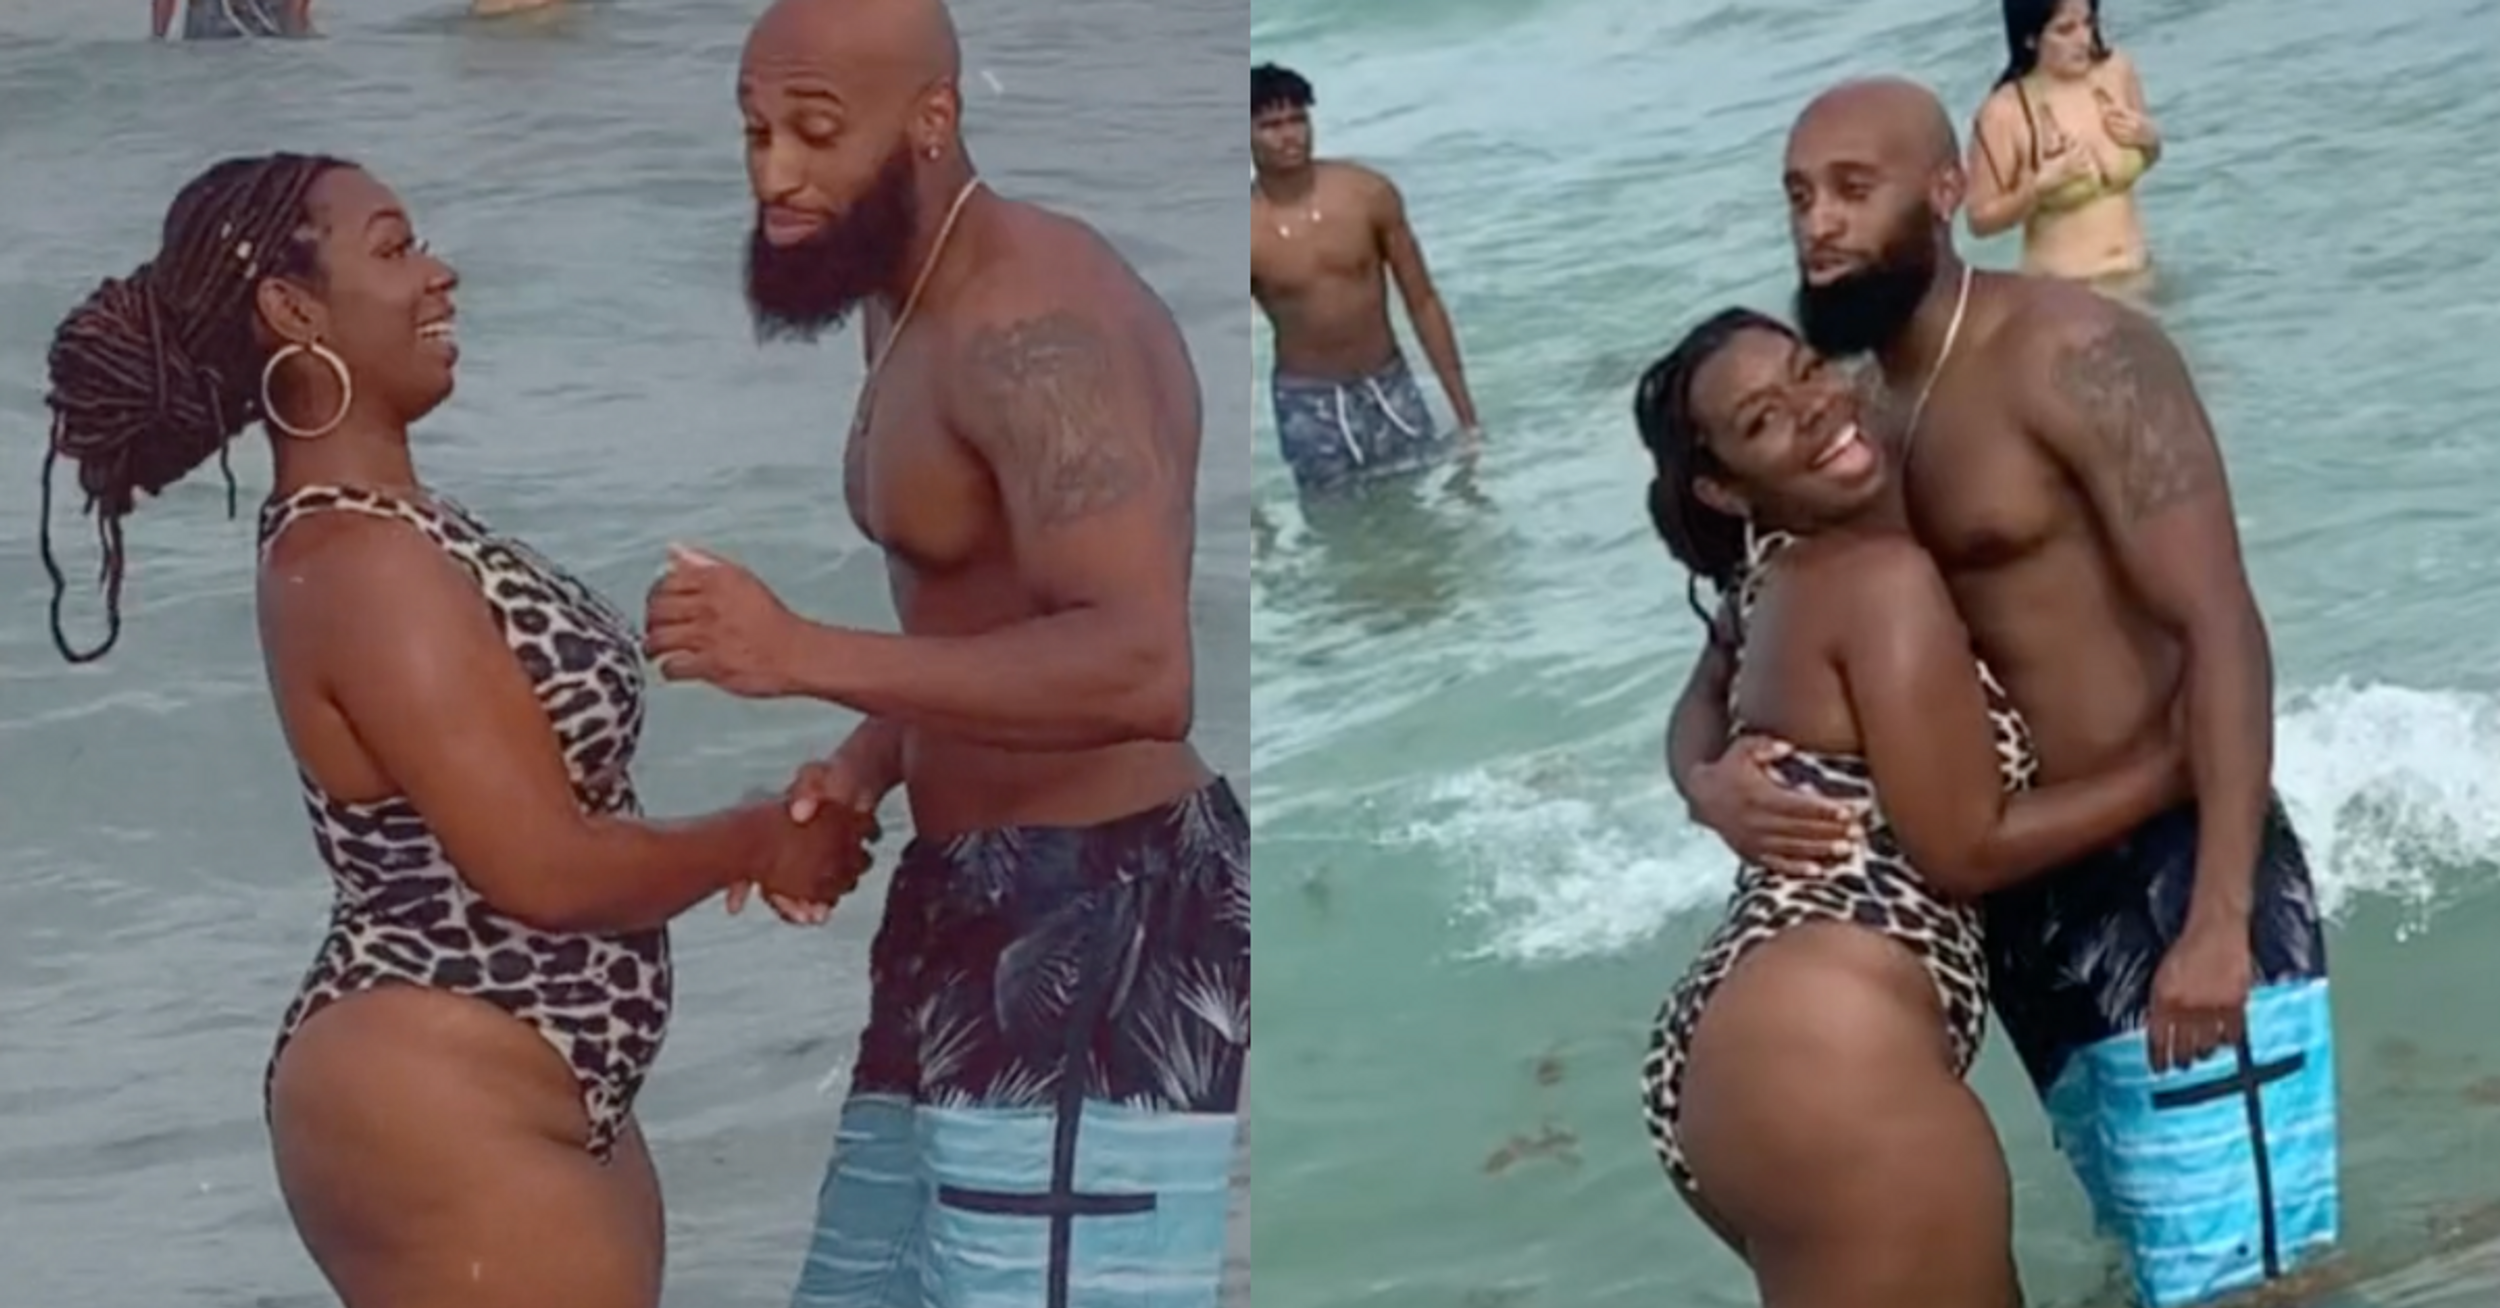 Woman Asks TikTok To Help Her Find Man She Met On The Beach—But They Find His Wife Instead